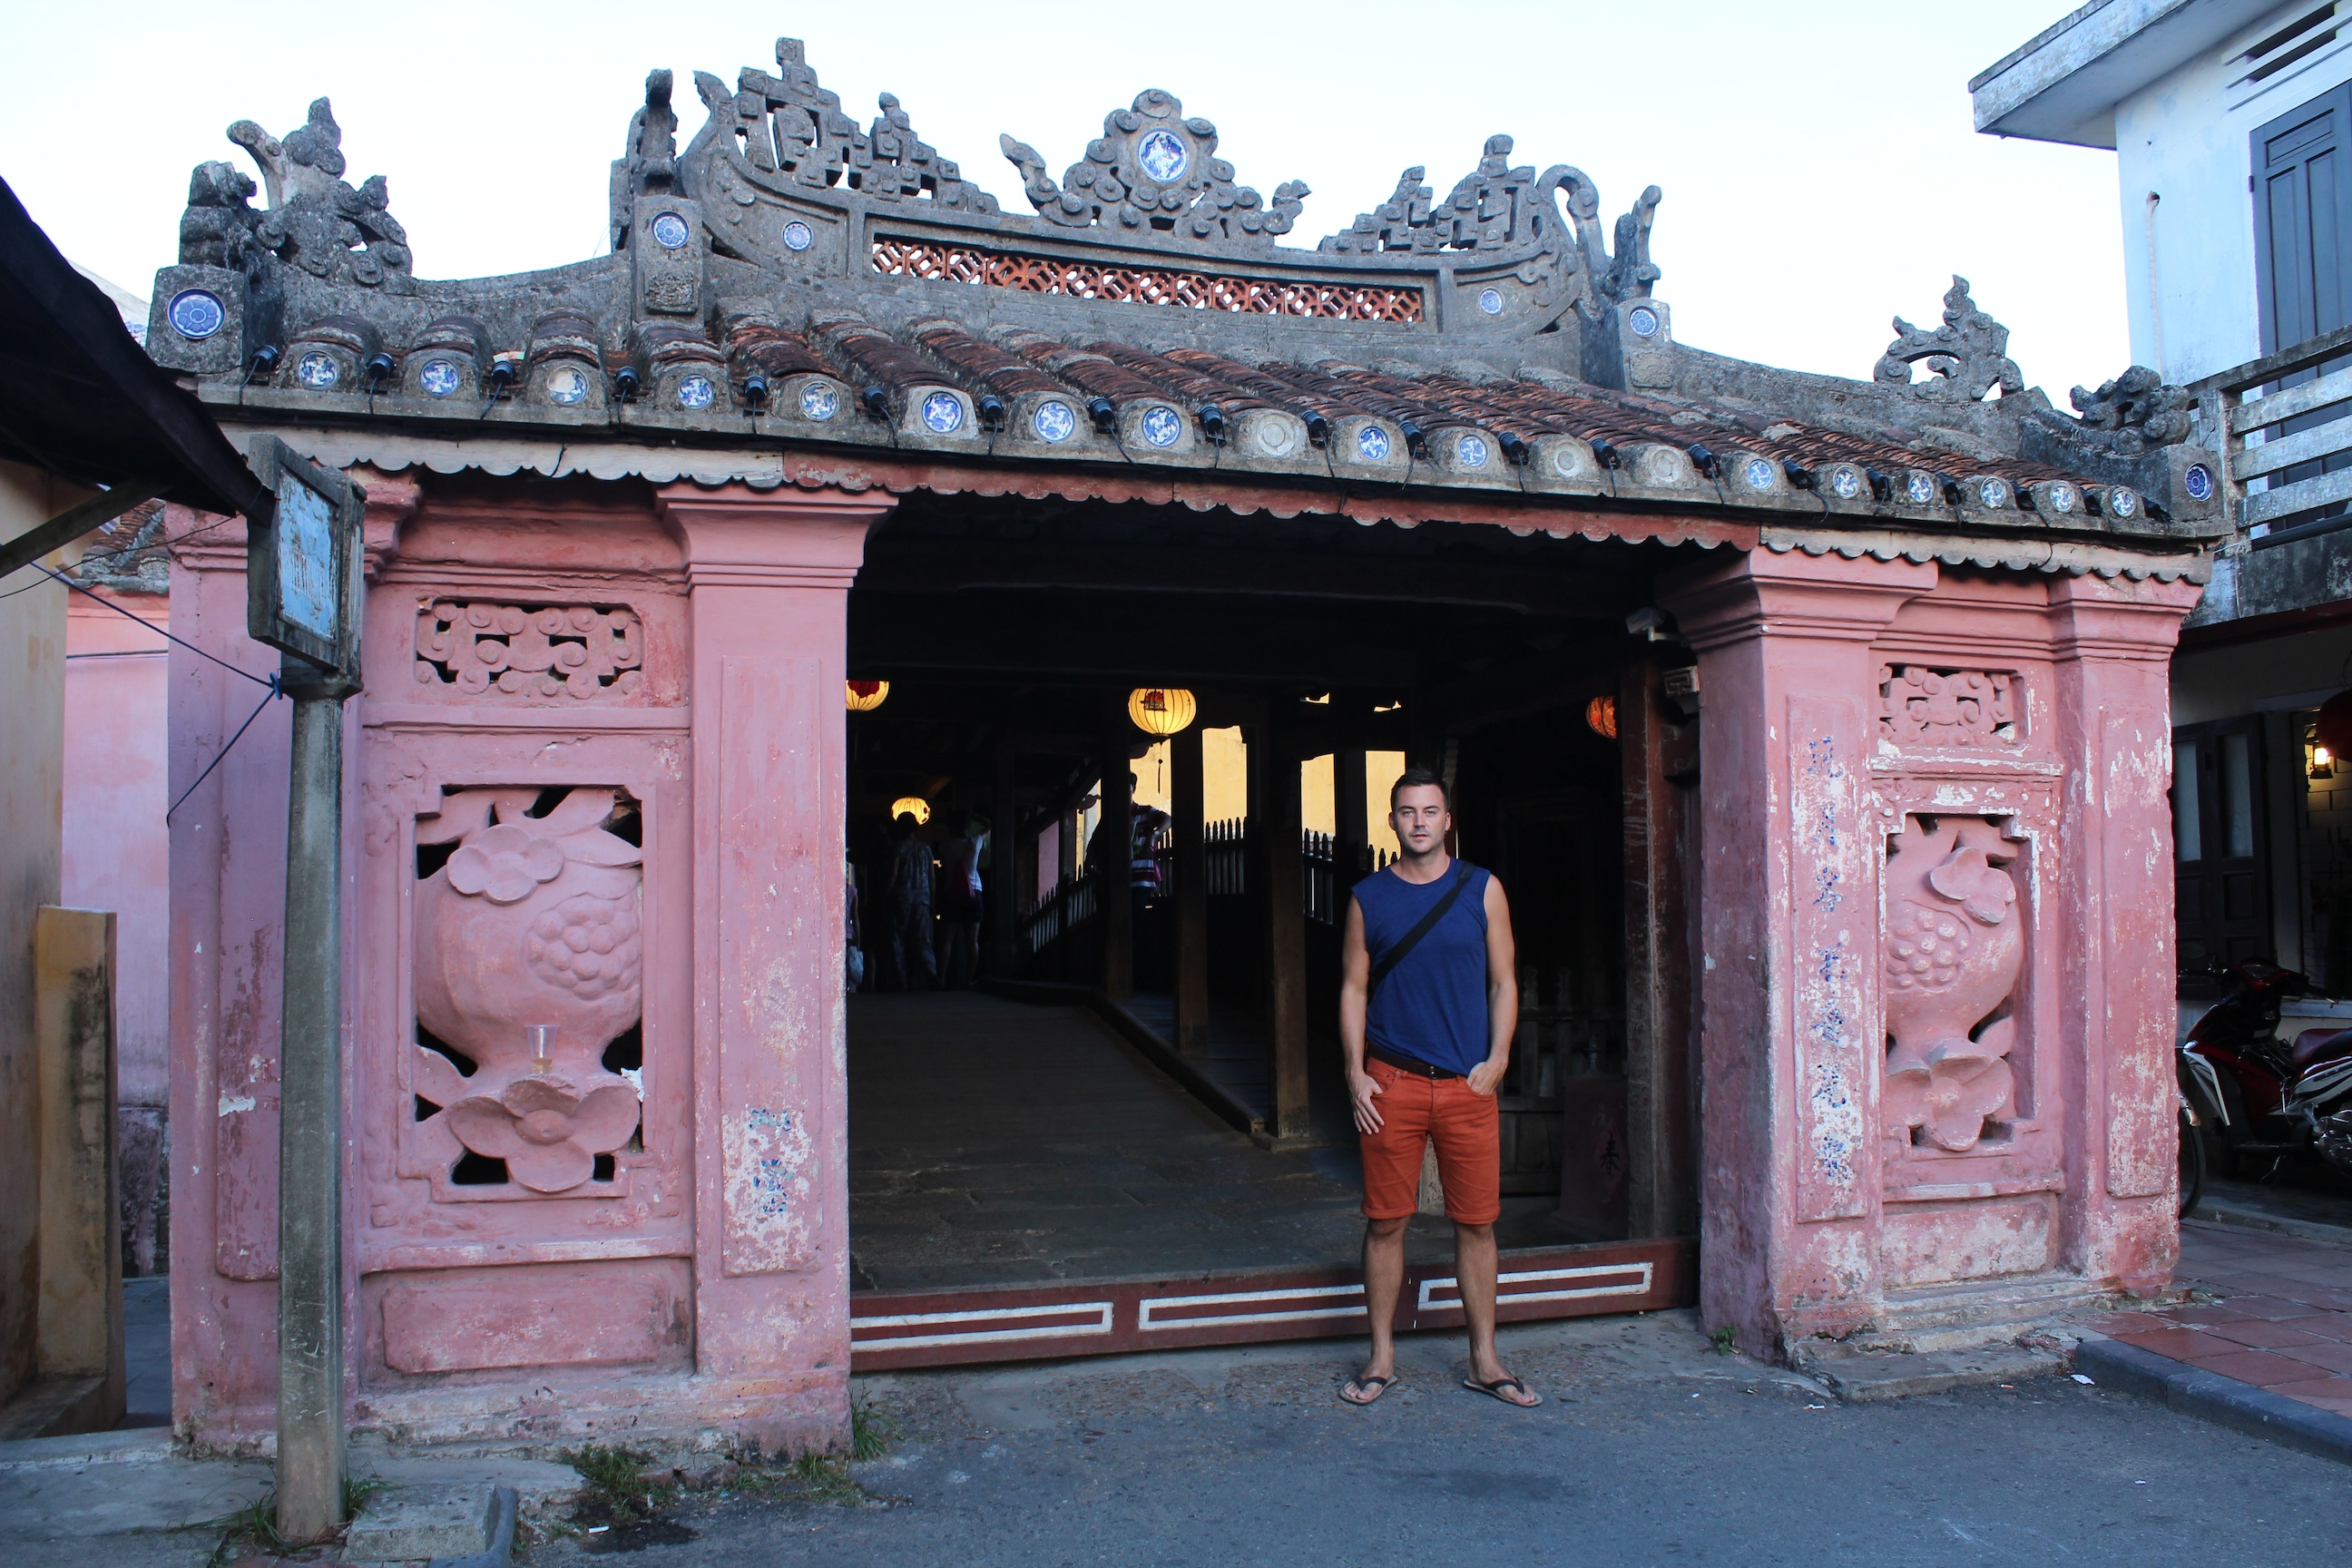 Entrance to Japanese Bridge in Hoi An Ancient Town